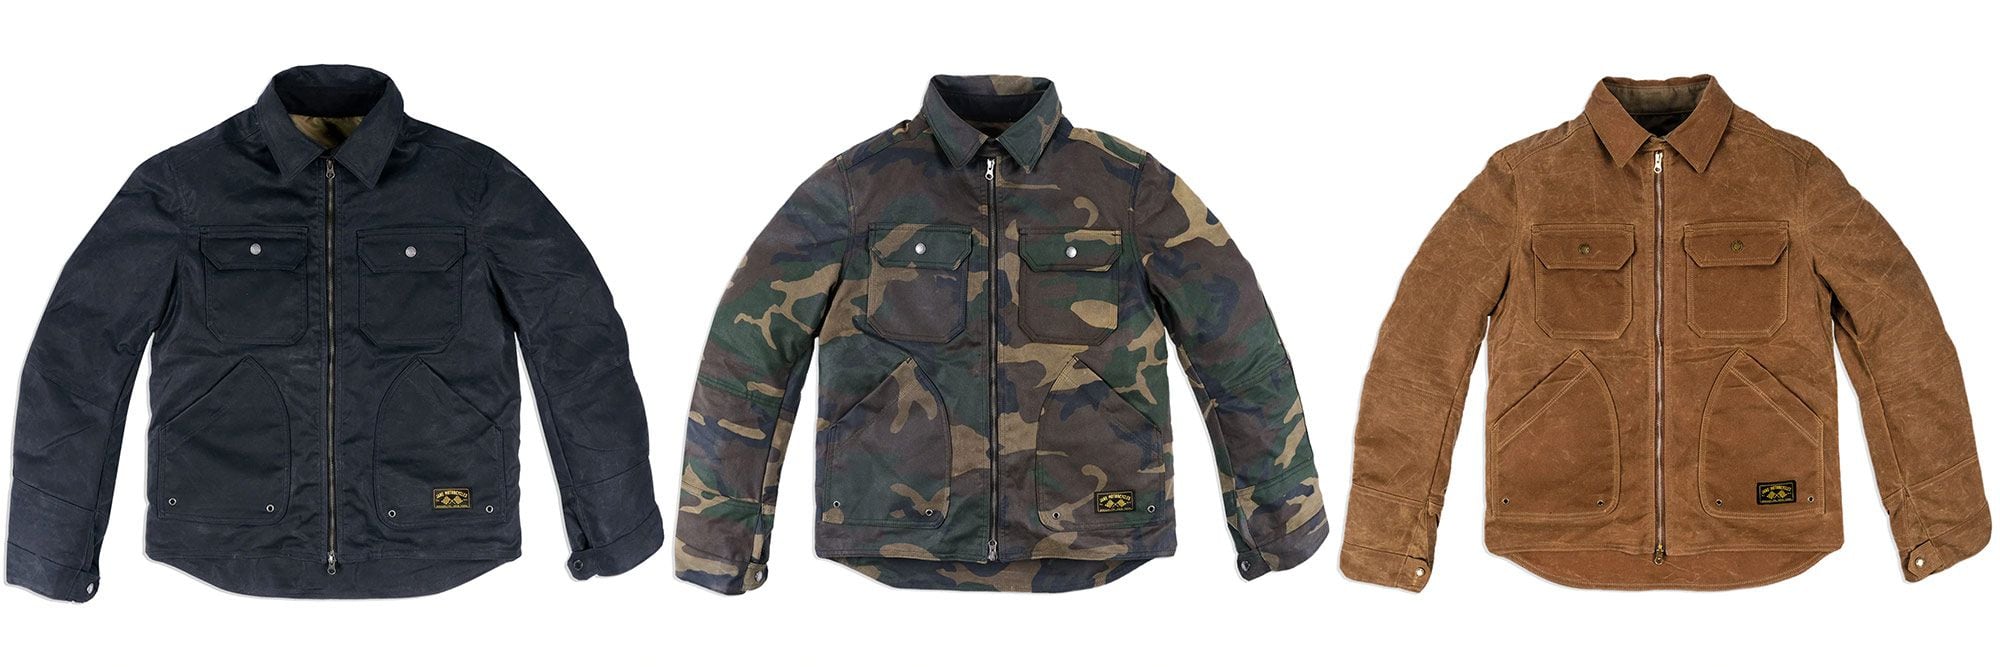 In addition to the Woodland ducks found here, the Driggs 2.0 jacket is available in black and tan.